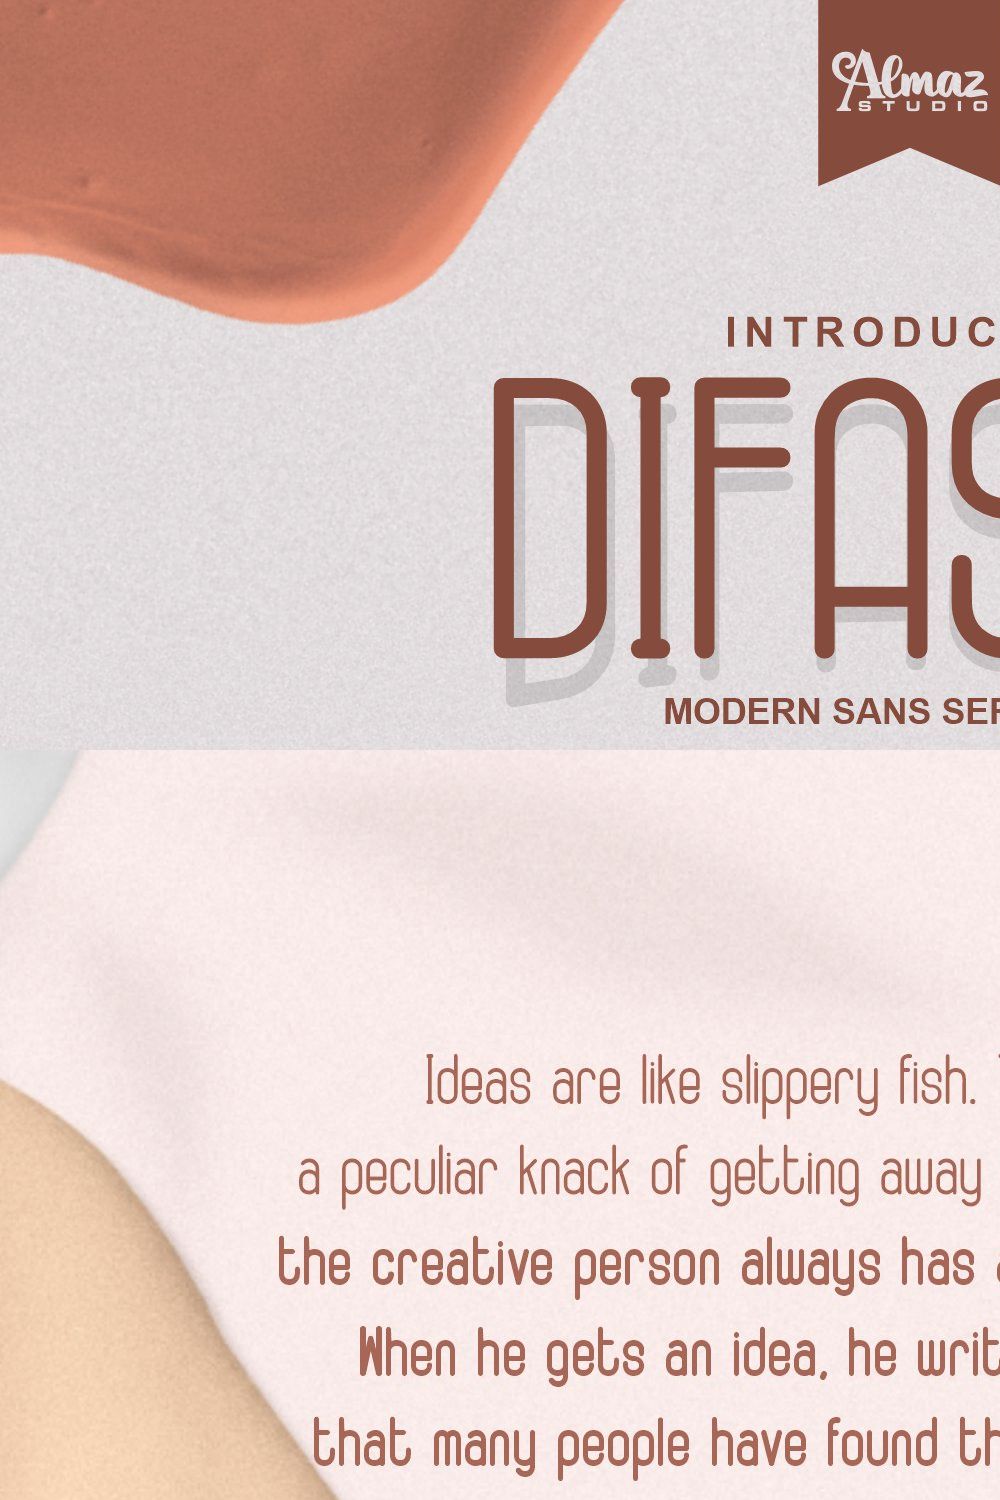 Difasta pinterest preview image.